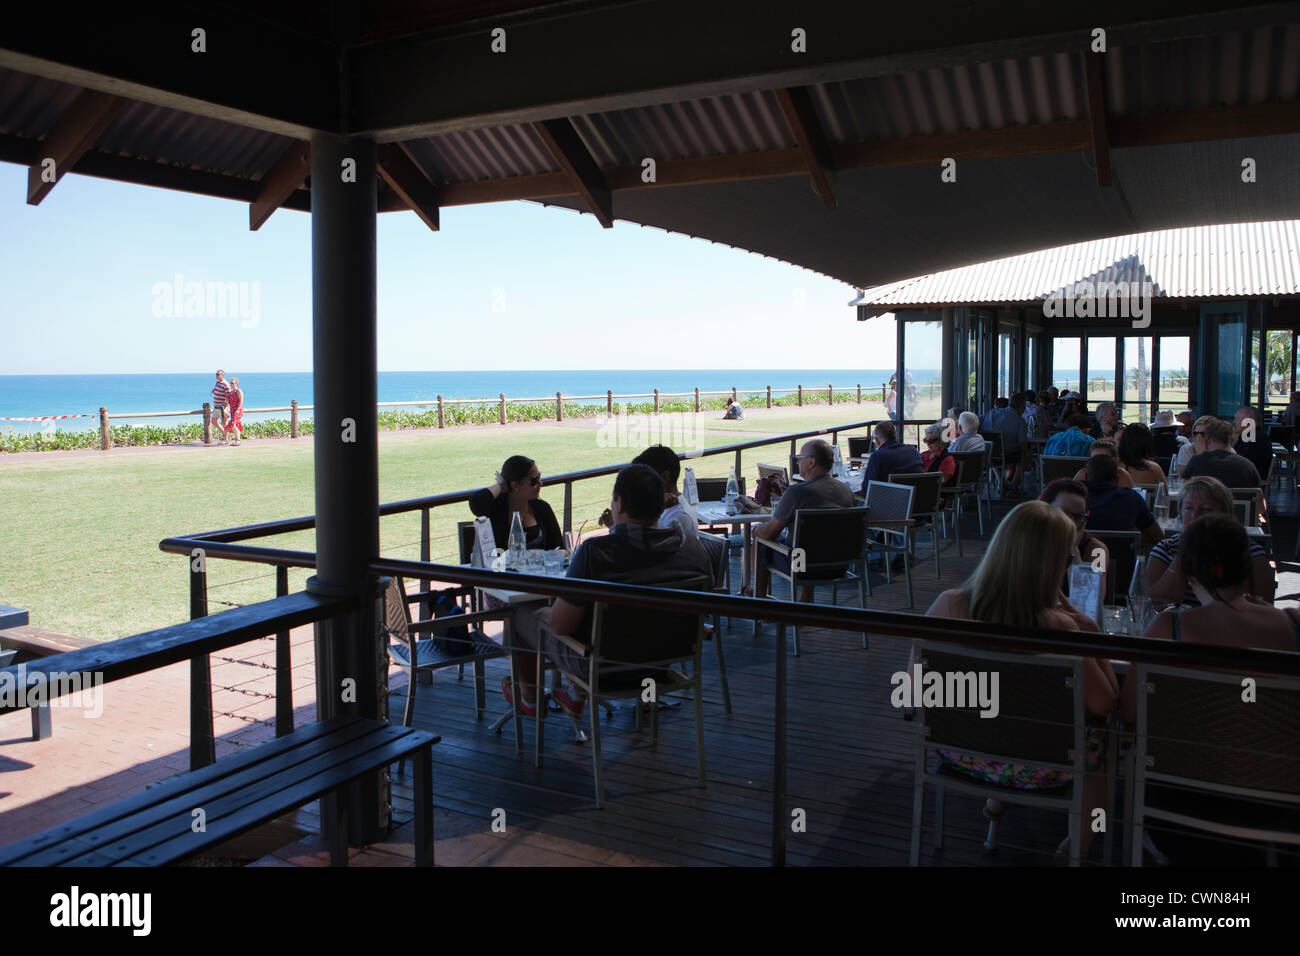 Covered outdoor eating area on Cable Beach, Broome, Western Australia Stock Photo